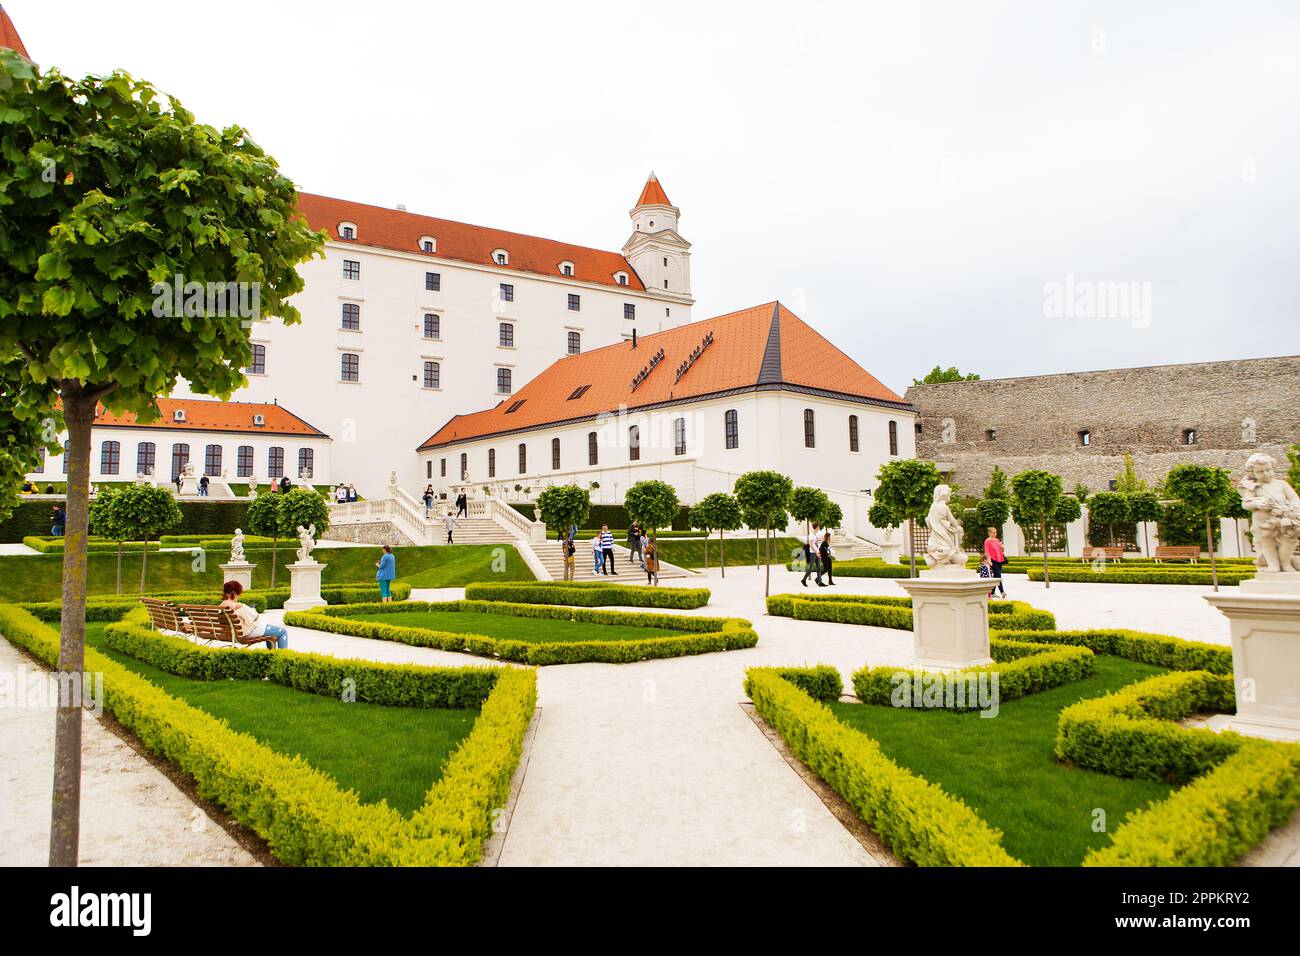 The courtyard garden of the baroque castle of Bratislava. The castle stands on an isolated rocky hill directly above the Danube River in the center of Bratislava, Slovakia. Stock Photo